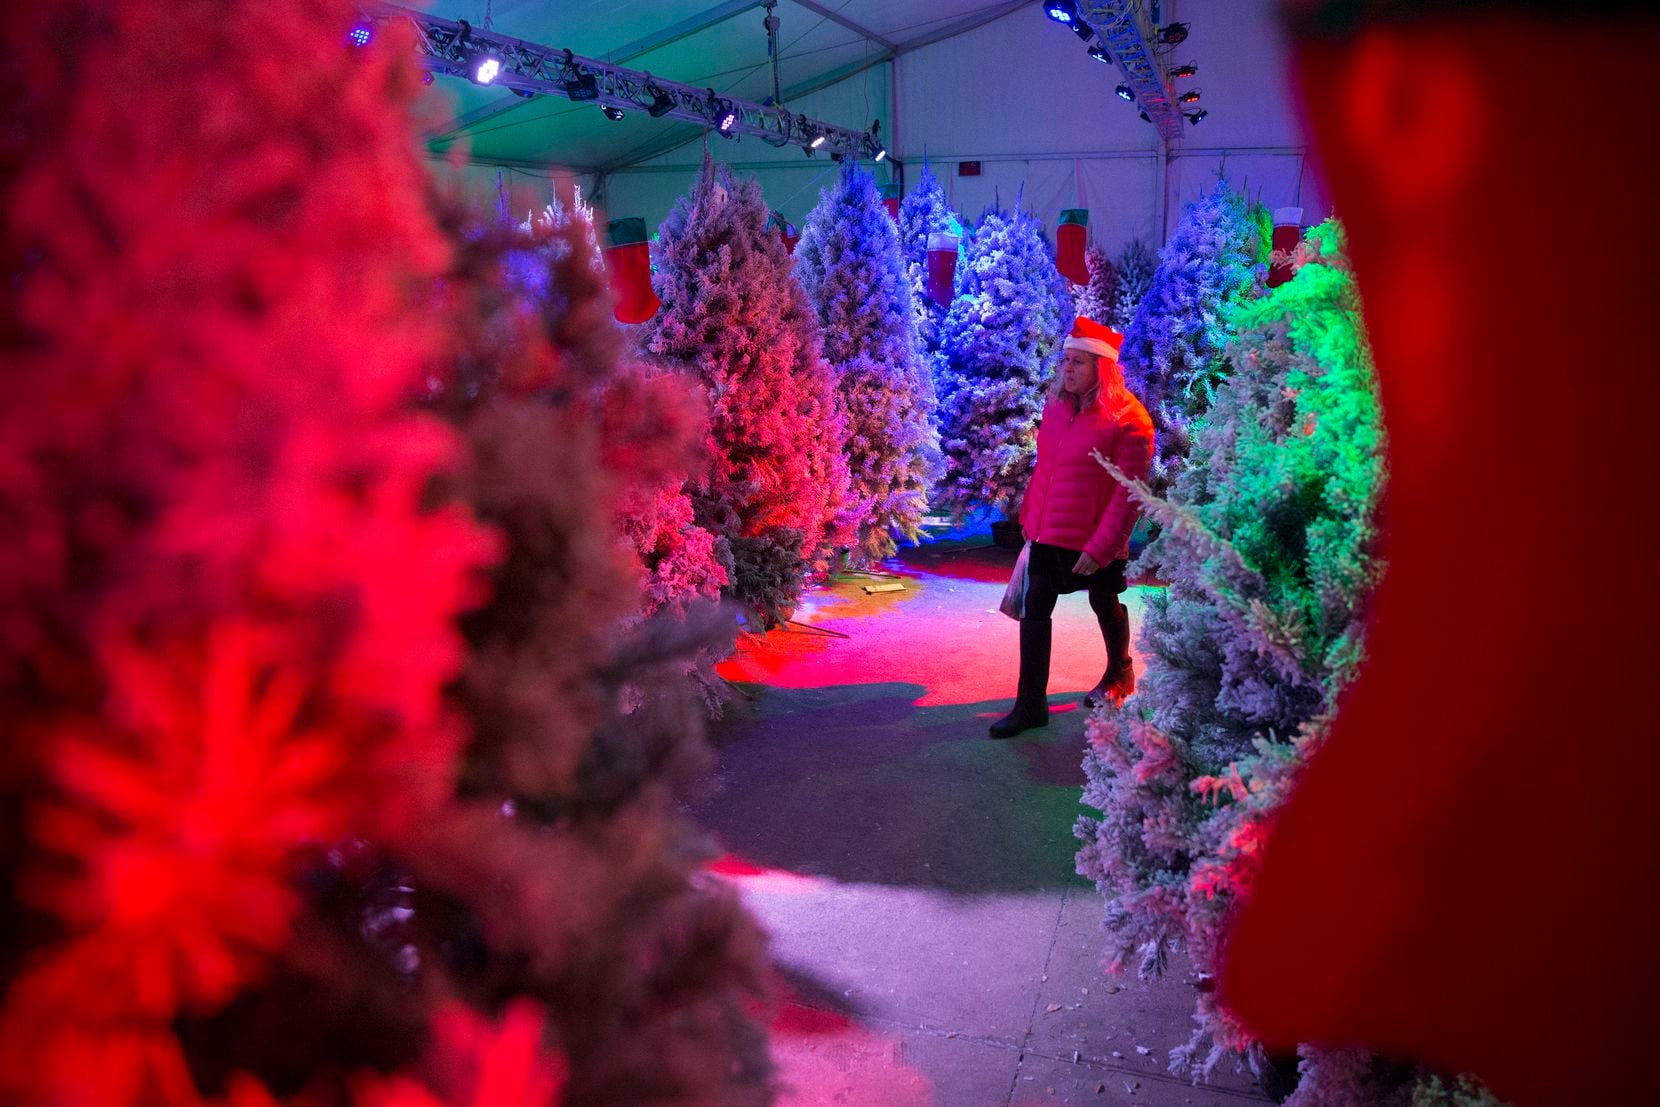 Maritza Capous of San Francisco, California explores the Christmas tree maze at Merry Main Street in Frisco, Texas on Saturday, Dec. 1, 2018. Capous was in town visiting her daughter.